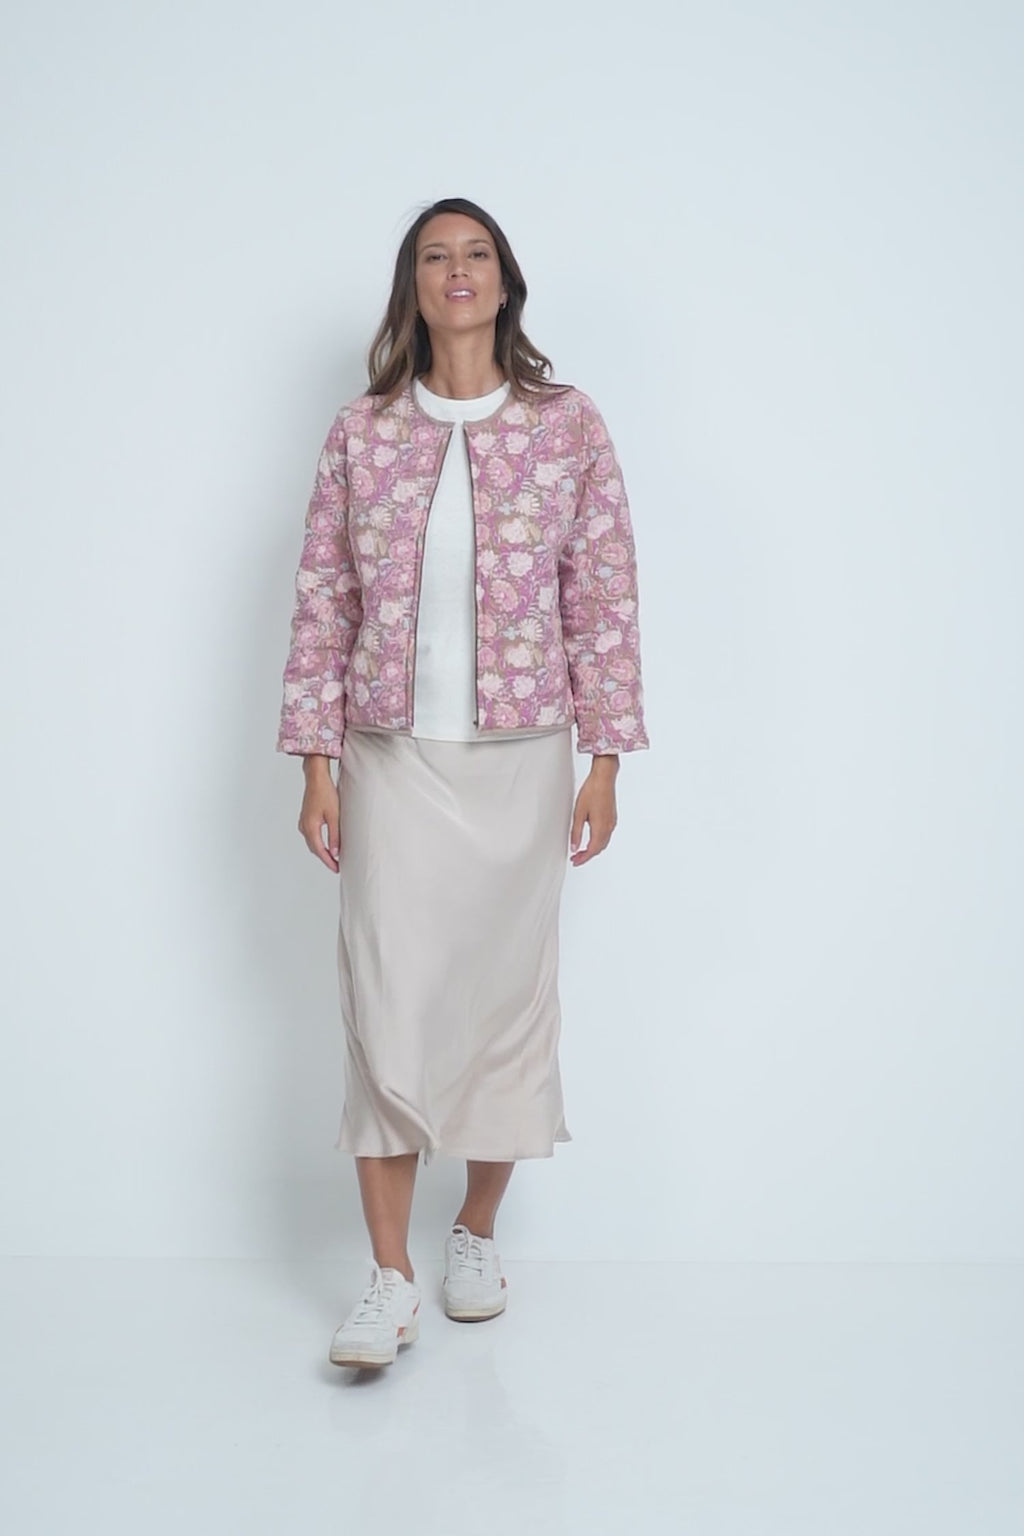 A Model Wearing a Pink Floral Autumn Jacket